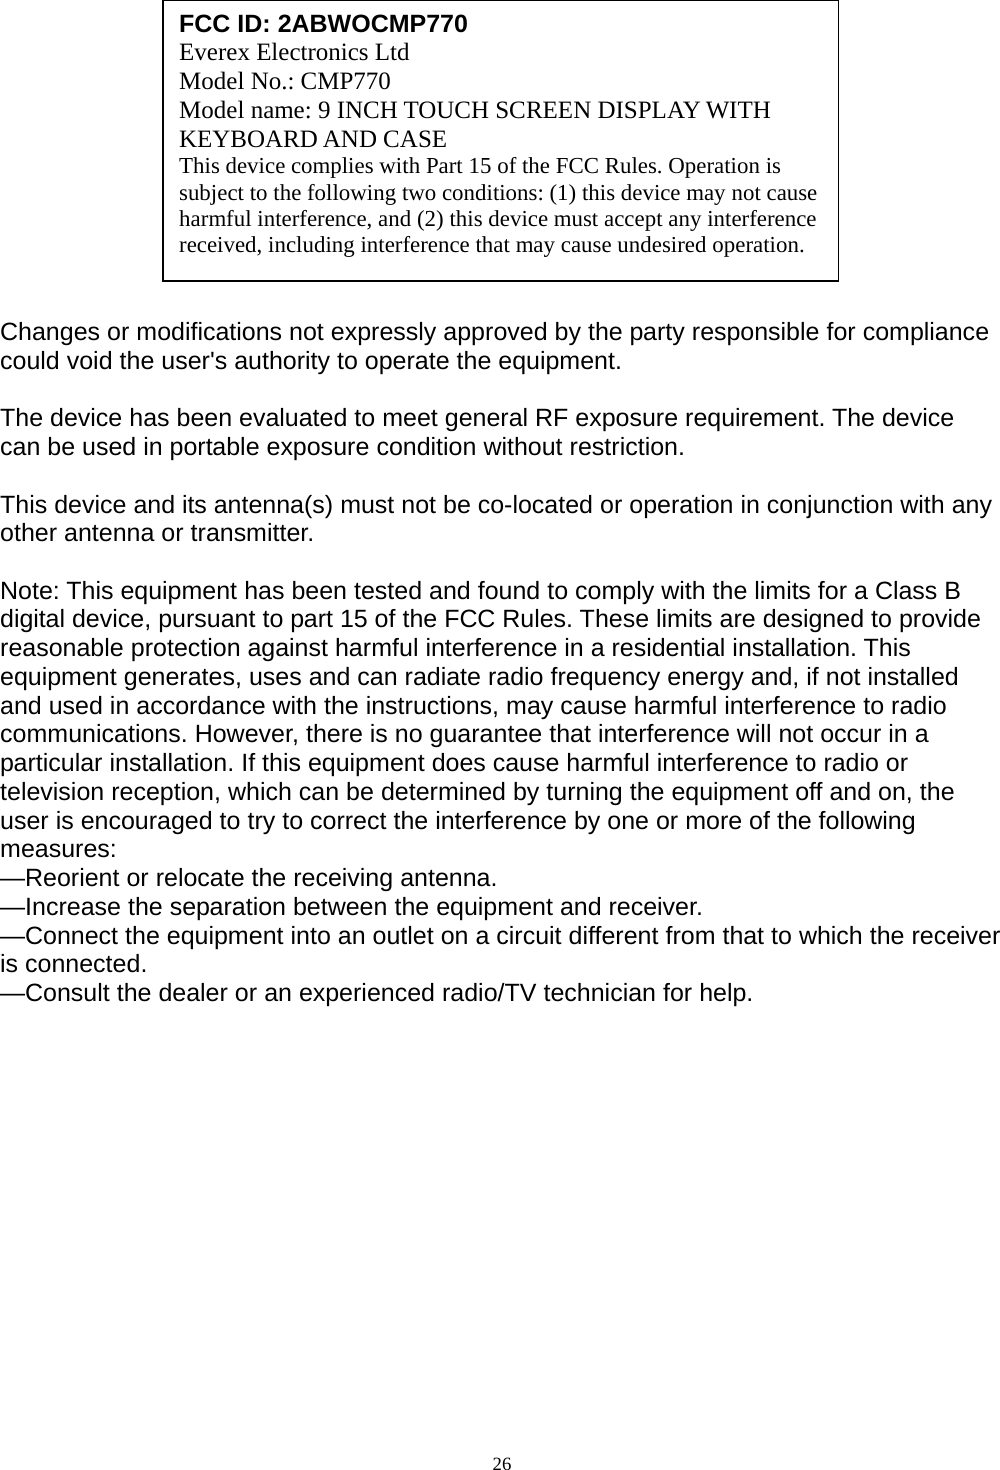              Changes or modifications not expressly approved by the party responsible for compliance could void the user&apos;s authority to operate the equipment.  The device has been evaluated to meet general RF exposure requirement. The device  can be used in portable exposure condition without restriction.    This device and its antenna(s) must not be co-located or operation in conjunction with any other antenna or transmitter.  Note: This equipment has been tested and found to comply with the limits for a Class B digital device, pursuant to part 15 of the FCC Rules. These limits are designed to provide reasonable protection against harmful interference in a residential installation. This equipment generates, uses and can radiate radio frequency energy and, if not installed and used in accordance with the instructions, may cause harmful interference to radio communications. However, there is no guarantee that interference will not occur in a particular installation. If this equipment does cause harmful interference to radio or television reception, which can be determined by turning the equipment off and on, the user is encouraged to try to correct the interference by one or more of the following measures: —Reorient or relocate the receiving antenna. —Increase the separation between the equipment and receiver. —Connect the equipment into an outlet on a circuit different from that to which the receiver is connected. —Consult the dealer or an experienced radio/TV technician for help.   FCC ID: 2ABWOCMP770 Everex Electronics Ltd Model No.: CMP770 Model name: 9 INCH TOUCH SCREEN DISPLAY WITH KEYBOARD AND CASE This device complies with Part 15 of the FCC Rules. Operation is subject to the following two conditions: (1) this device may not cause harmful interference, and (2) this device must accept any interference received, including interference that may cause undesired operation.   26  